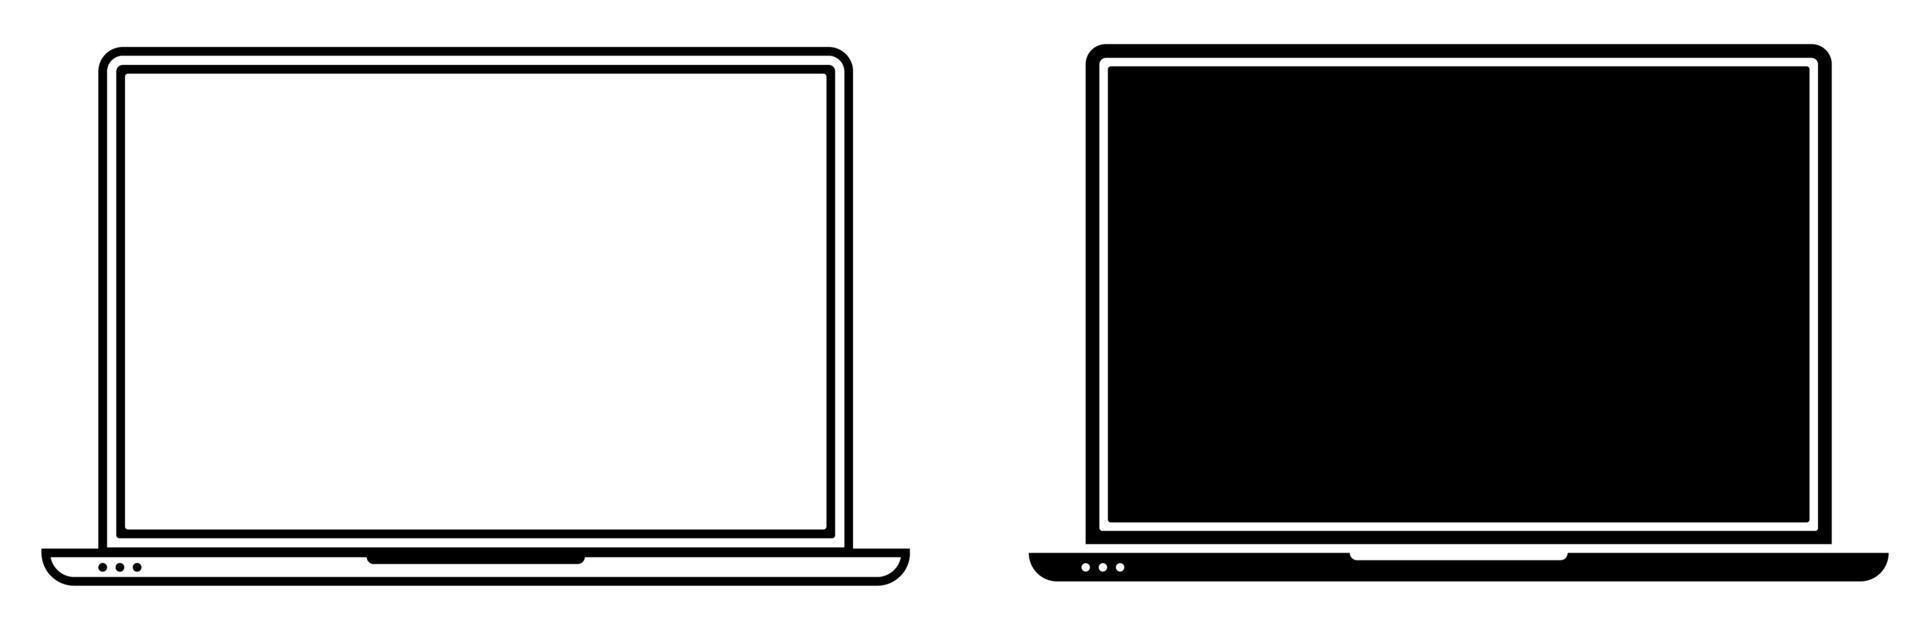 laptop icon in linear style on white background. Computer icon, laptop laptop for infographics. Vector